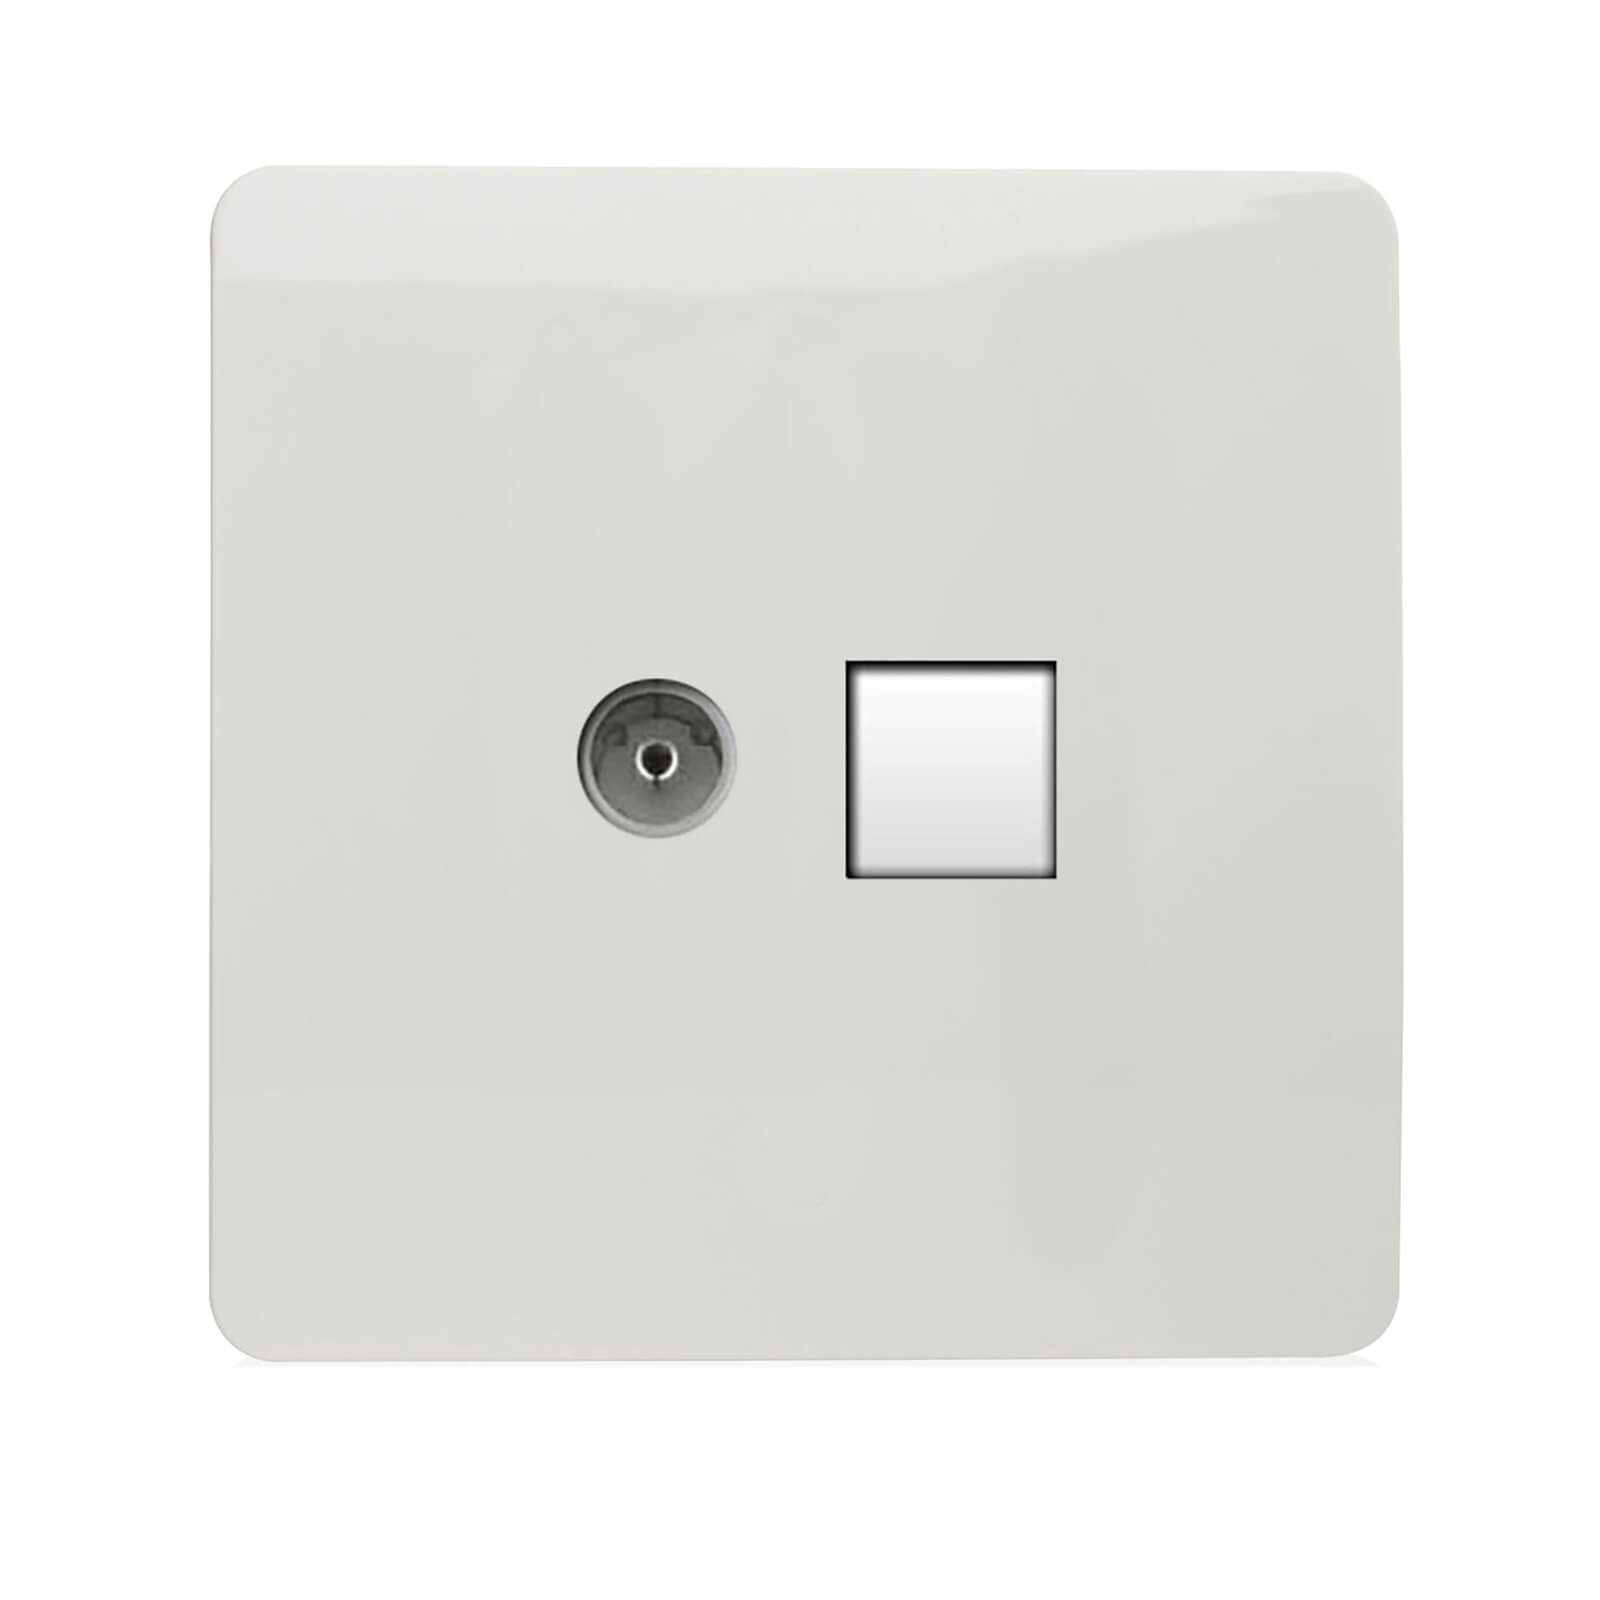 Trendi Switch TV Co-axial and Telephone Sockets in Screwless White